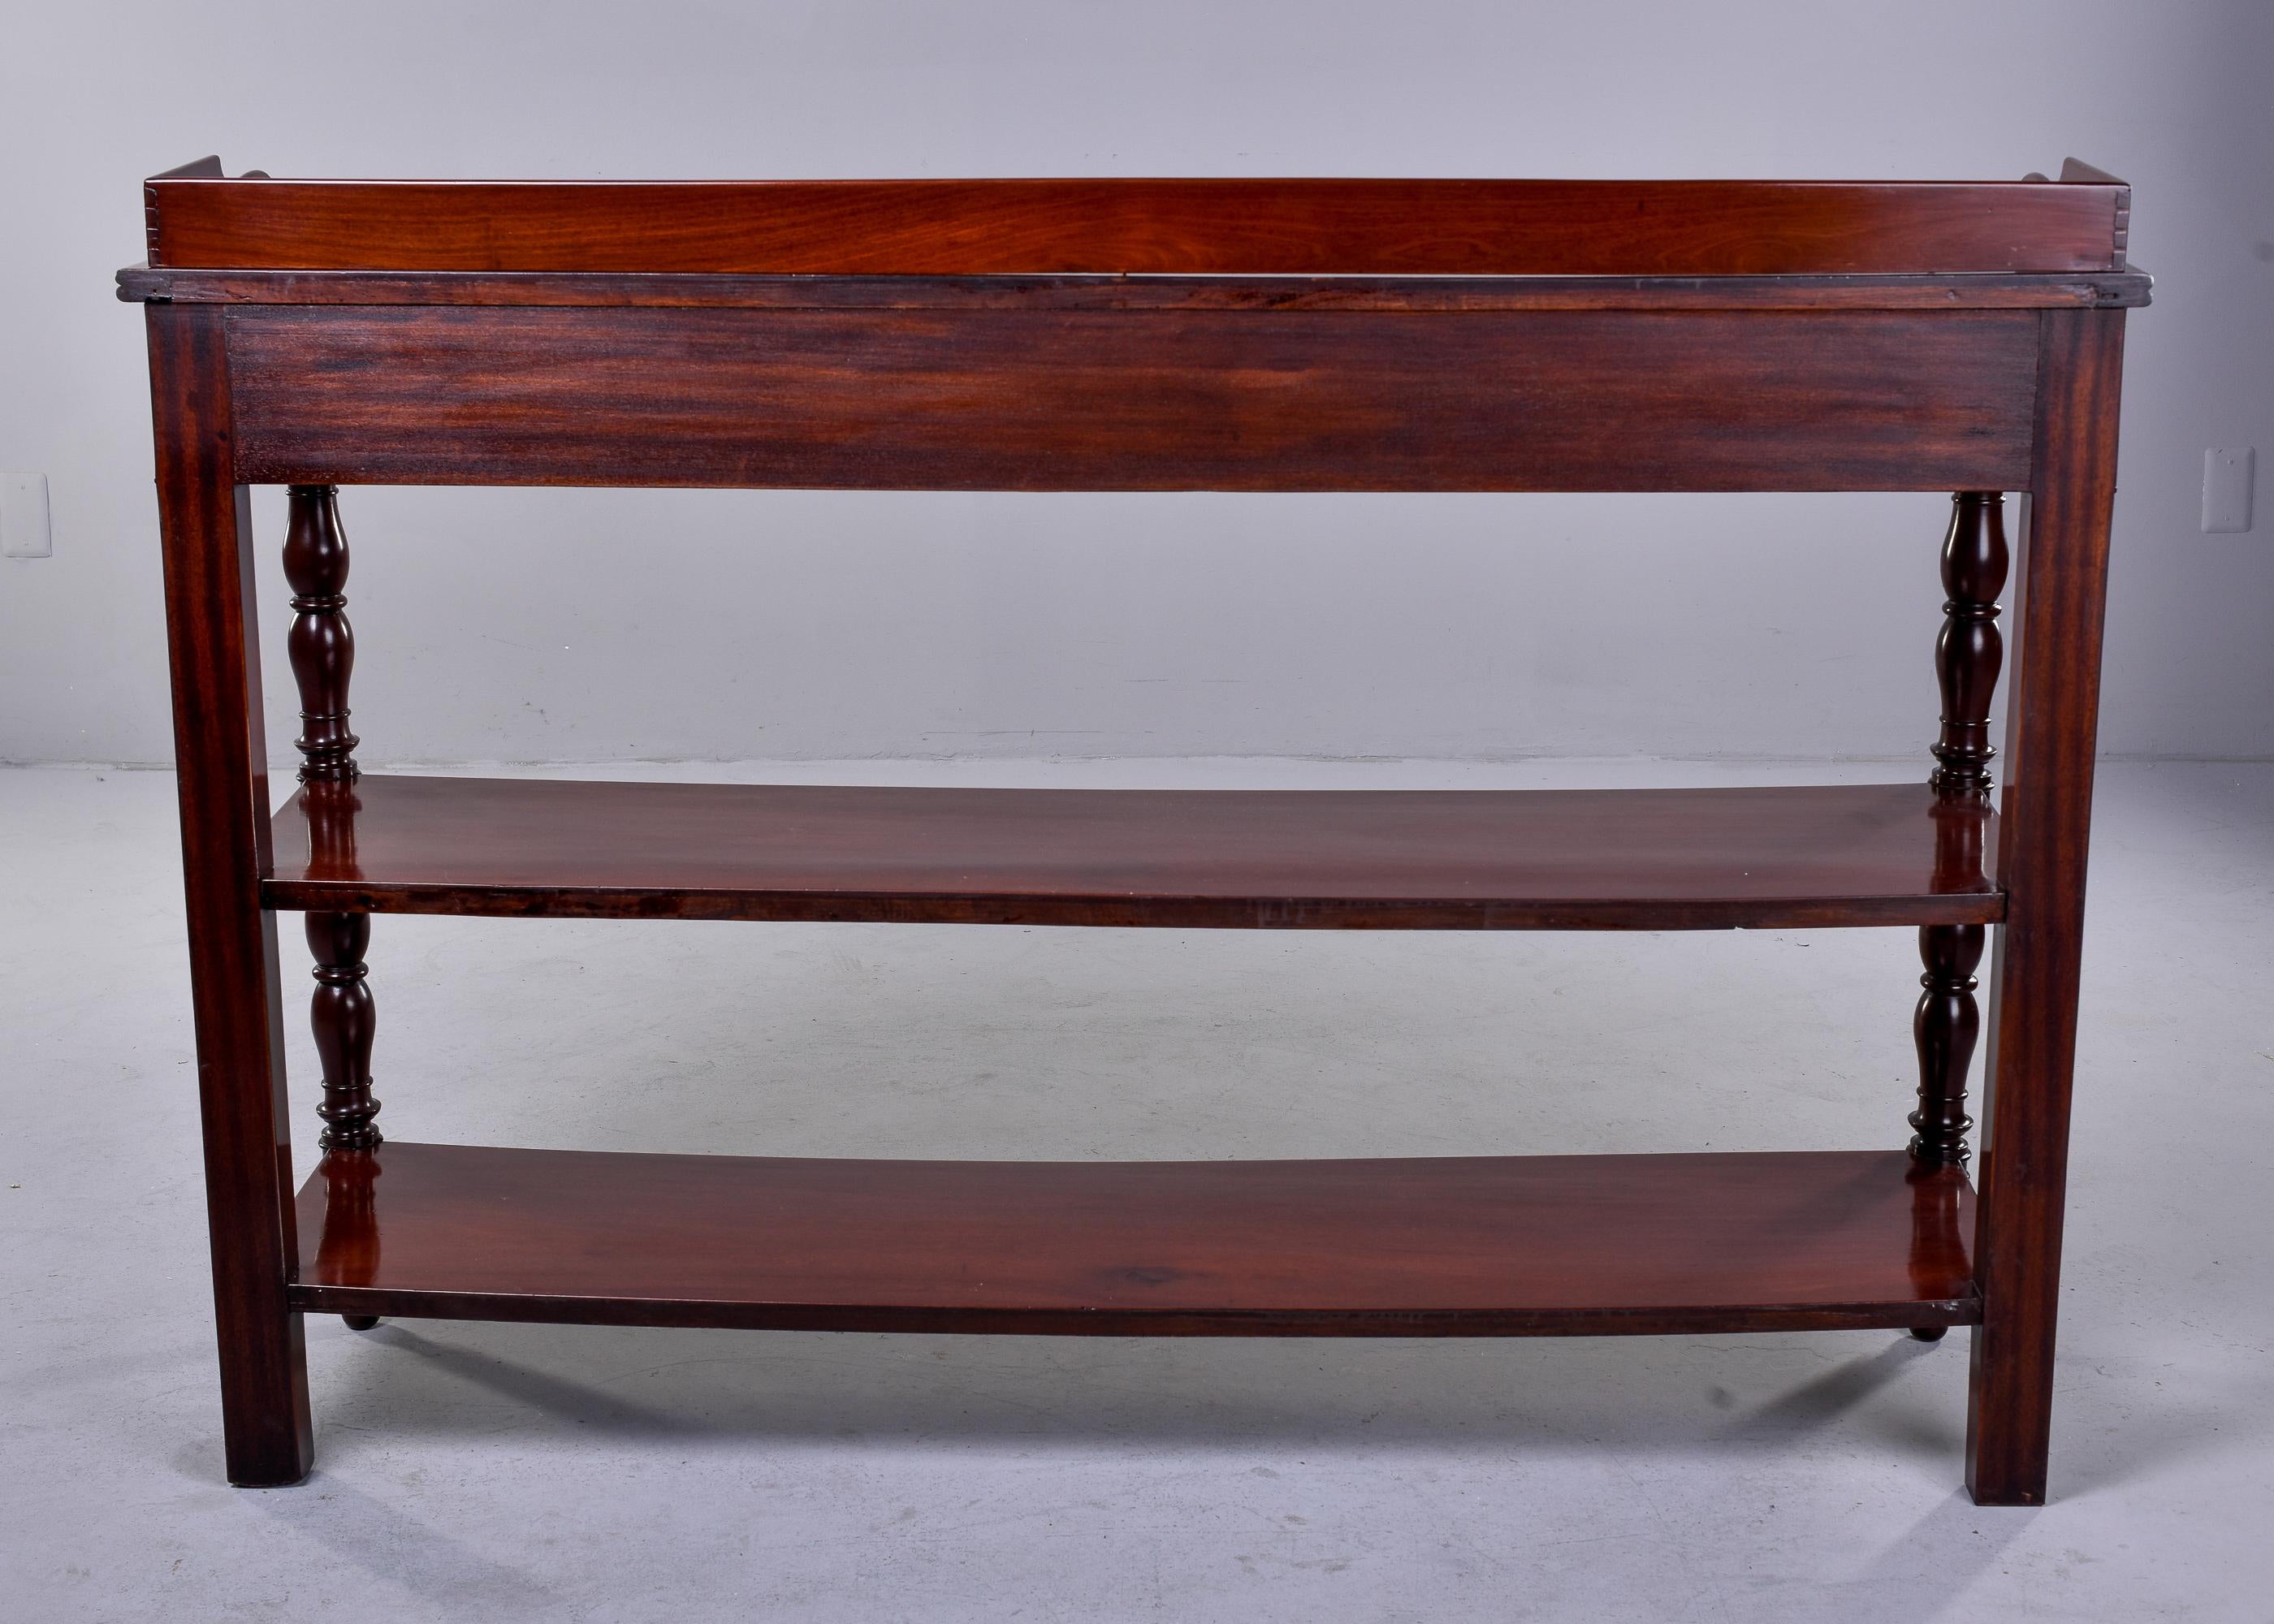 Early 20th C English Mahogany Three Tier Server with Drawers    For Sale 6